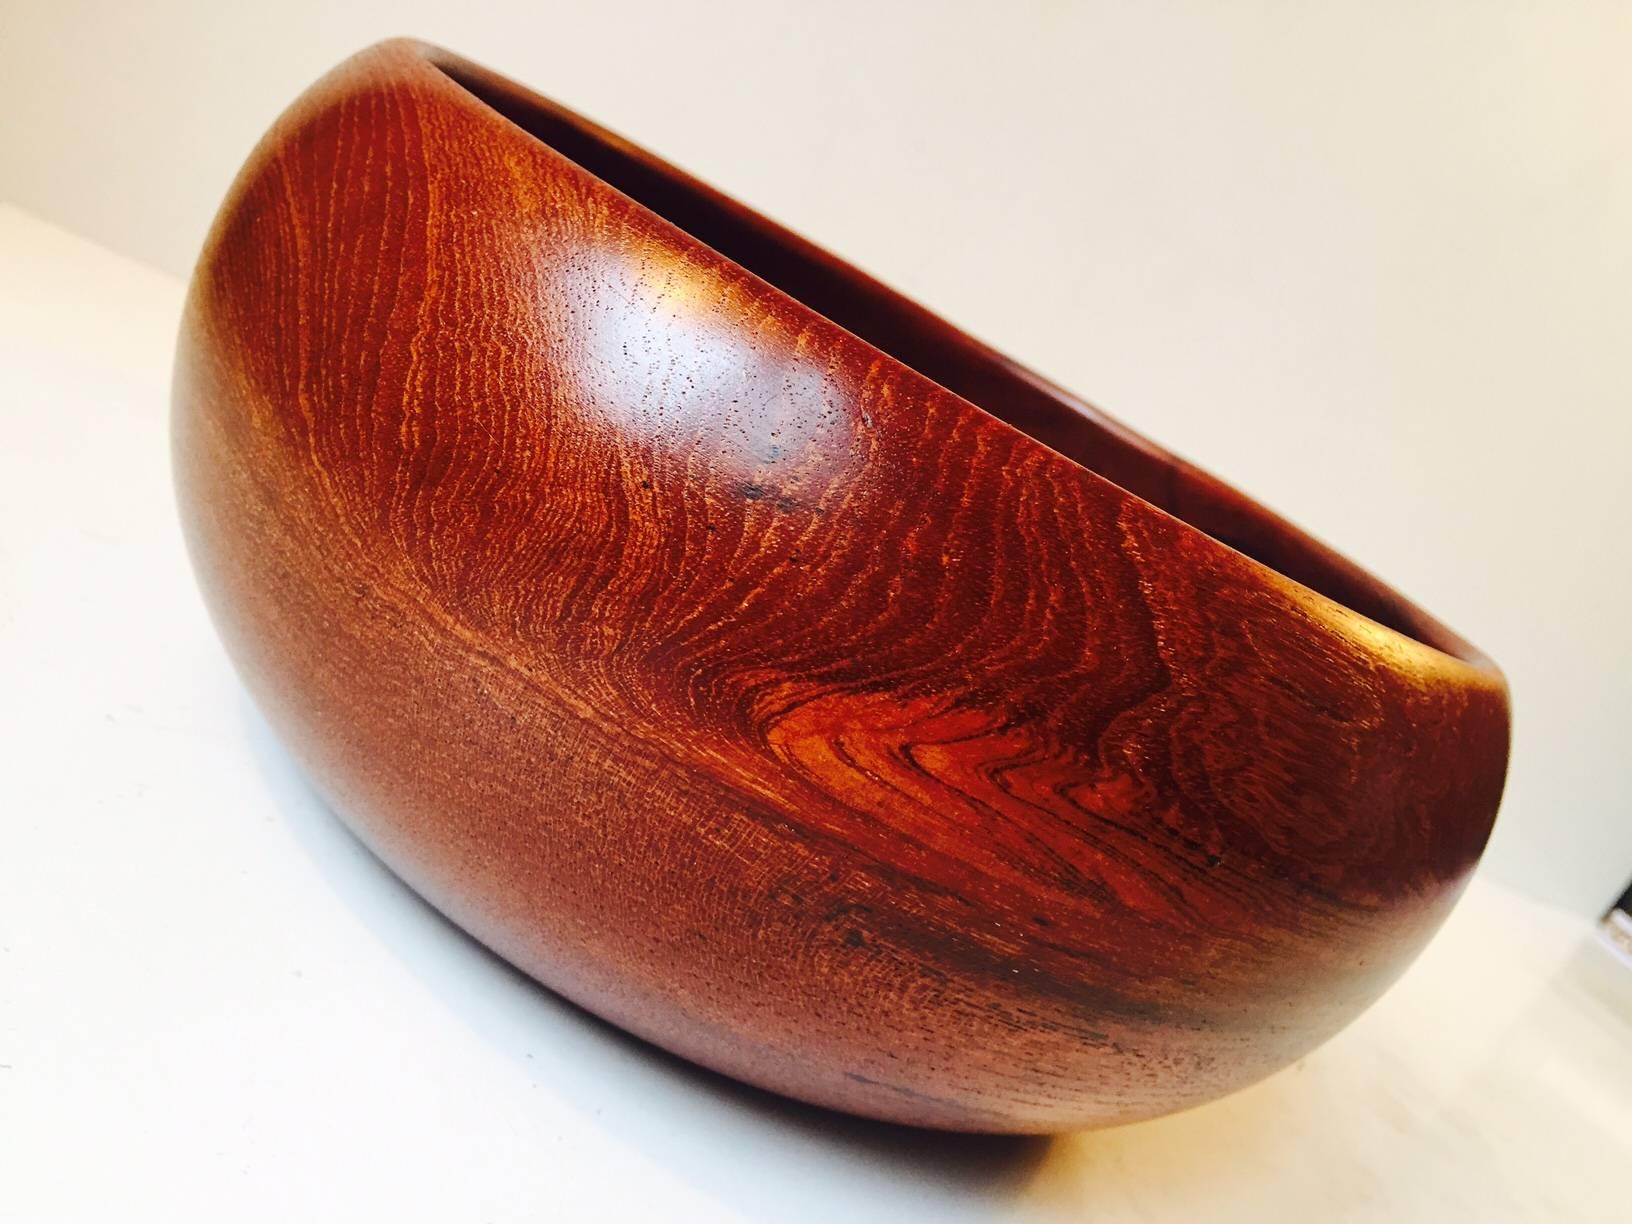 - Handmade bowl of solid Siamese teak
- Emphasis on the grain pattern
- Manufactured and designed by Kay Bojesen in his workshop in Copenhagen during the 1950s
- It is stamped: Kay Bojesen, Copyright, Denmark.